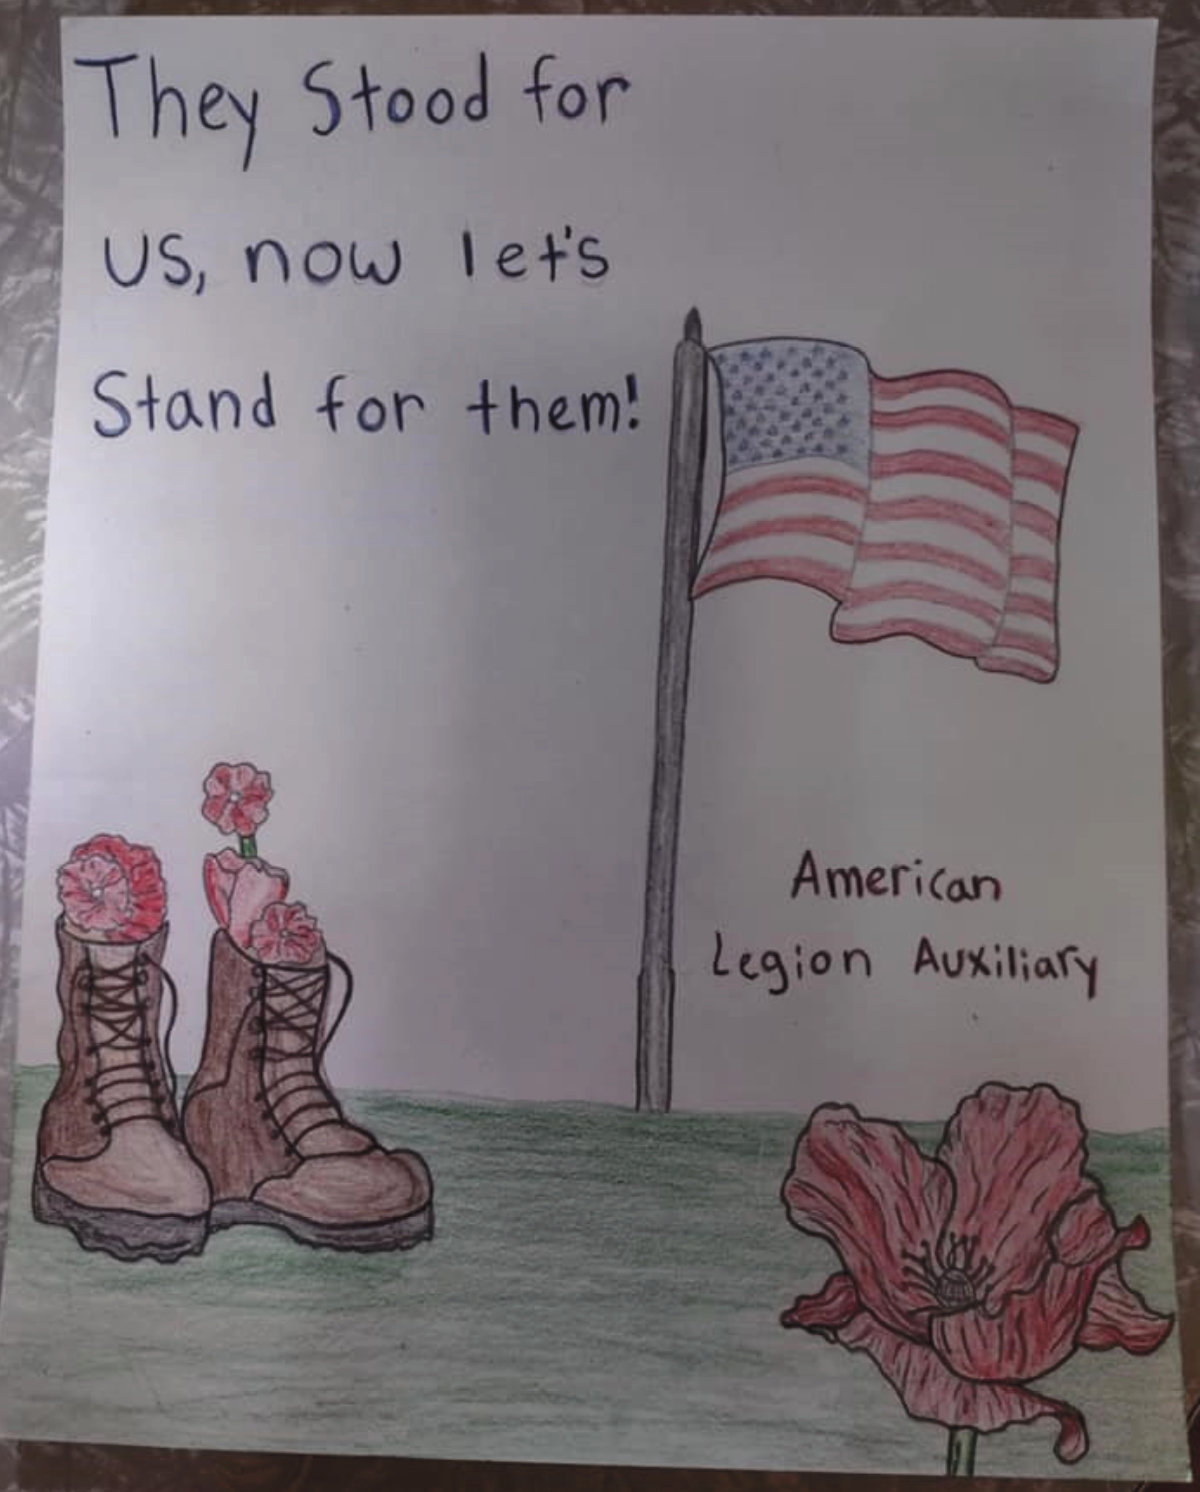 Lexi Burma, student of Iroquois High School, received 1st place at the state level for her American Legion Auxiliary Poppy Poster.